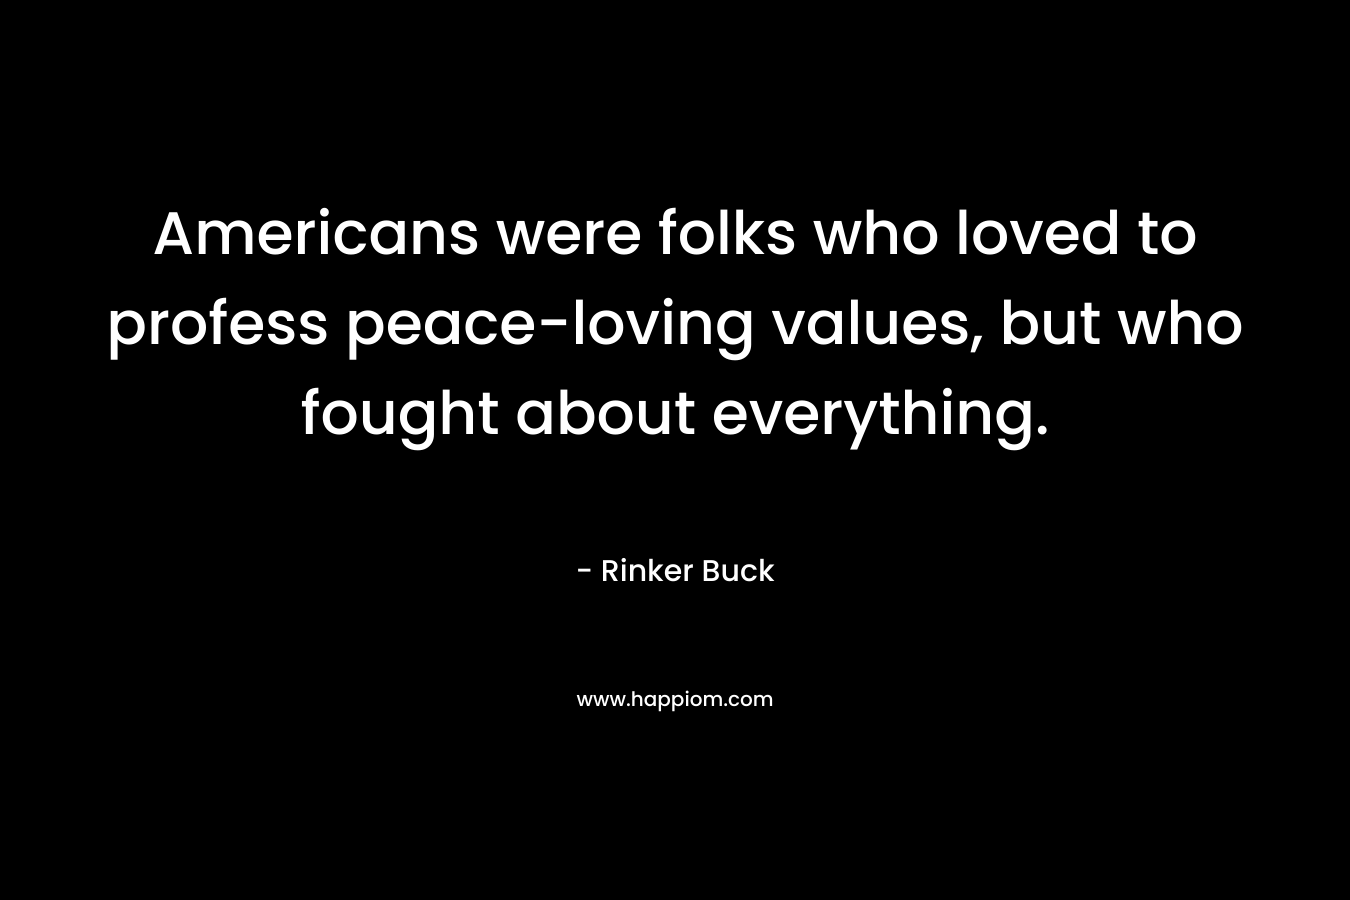 Americans were folks who loved to profess peace-loving values, but who fought about everything. – Rinker Buck